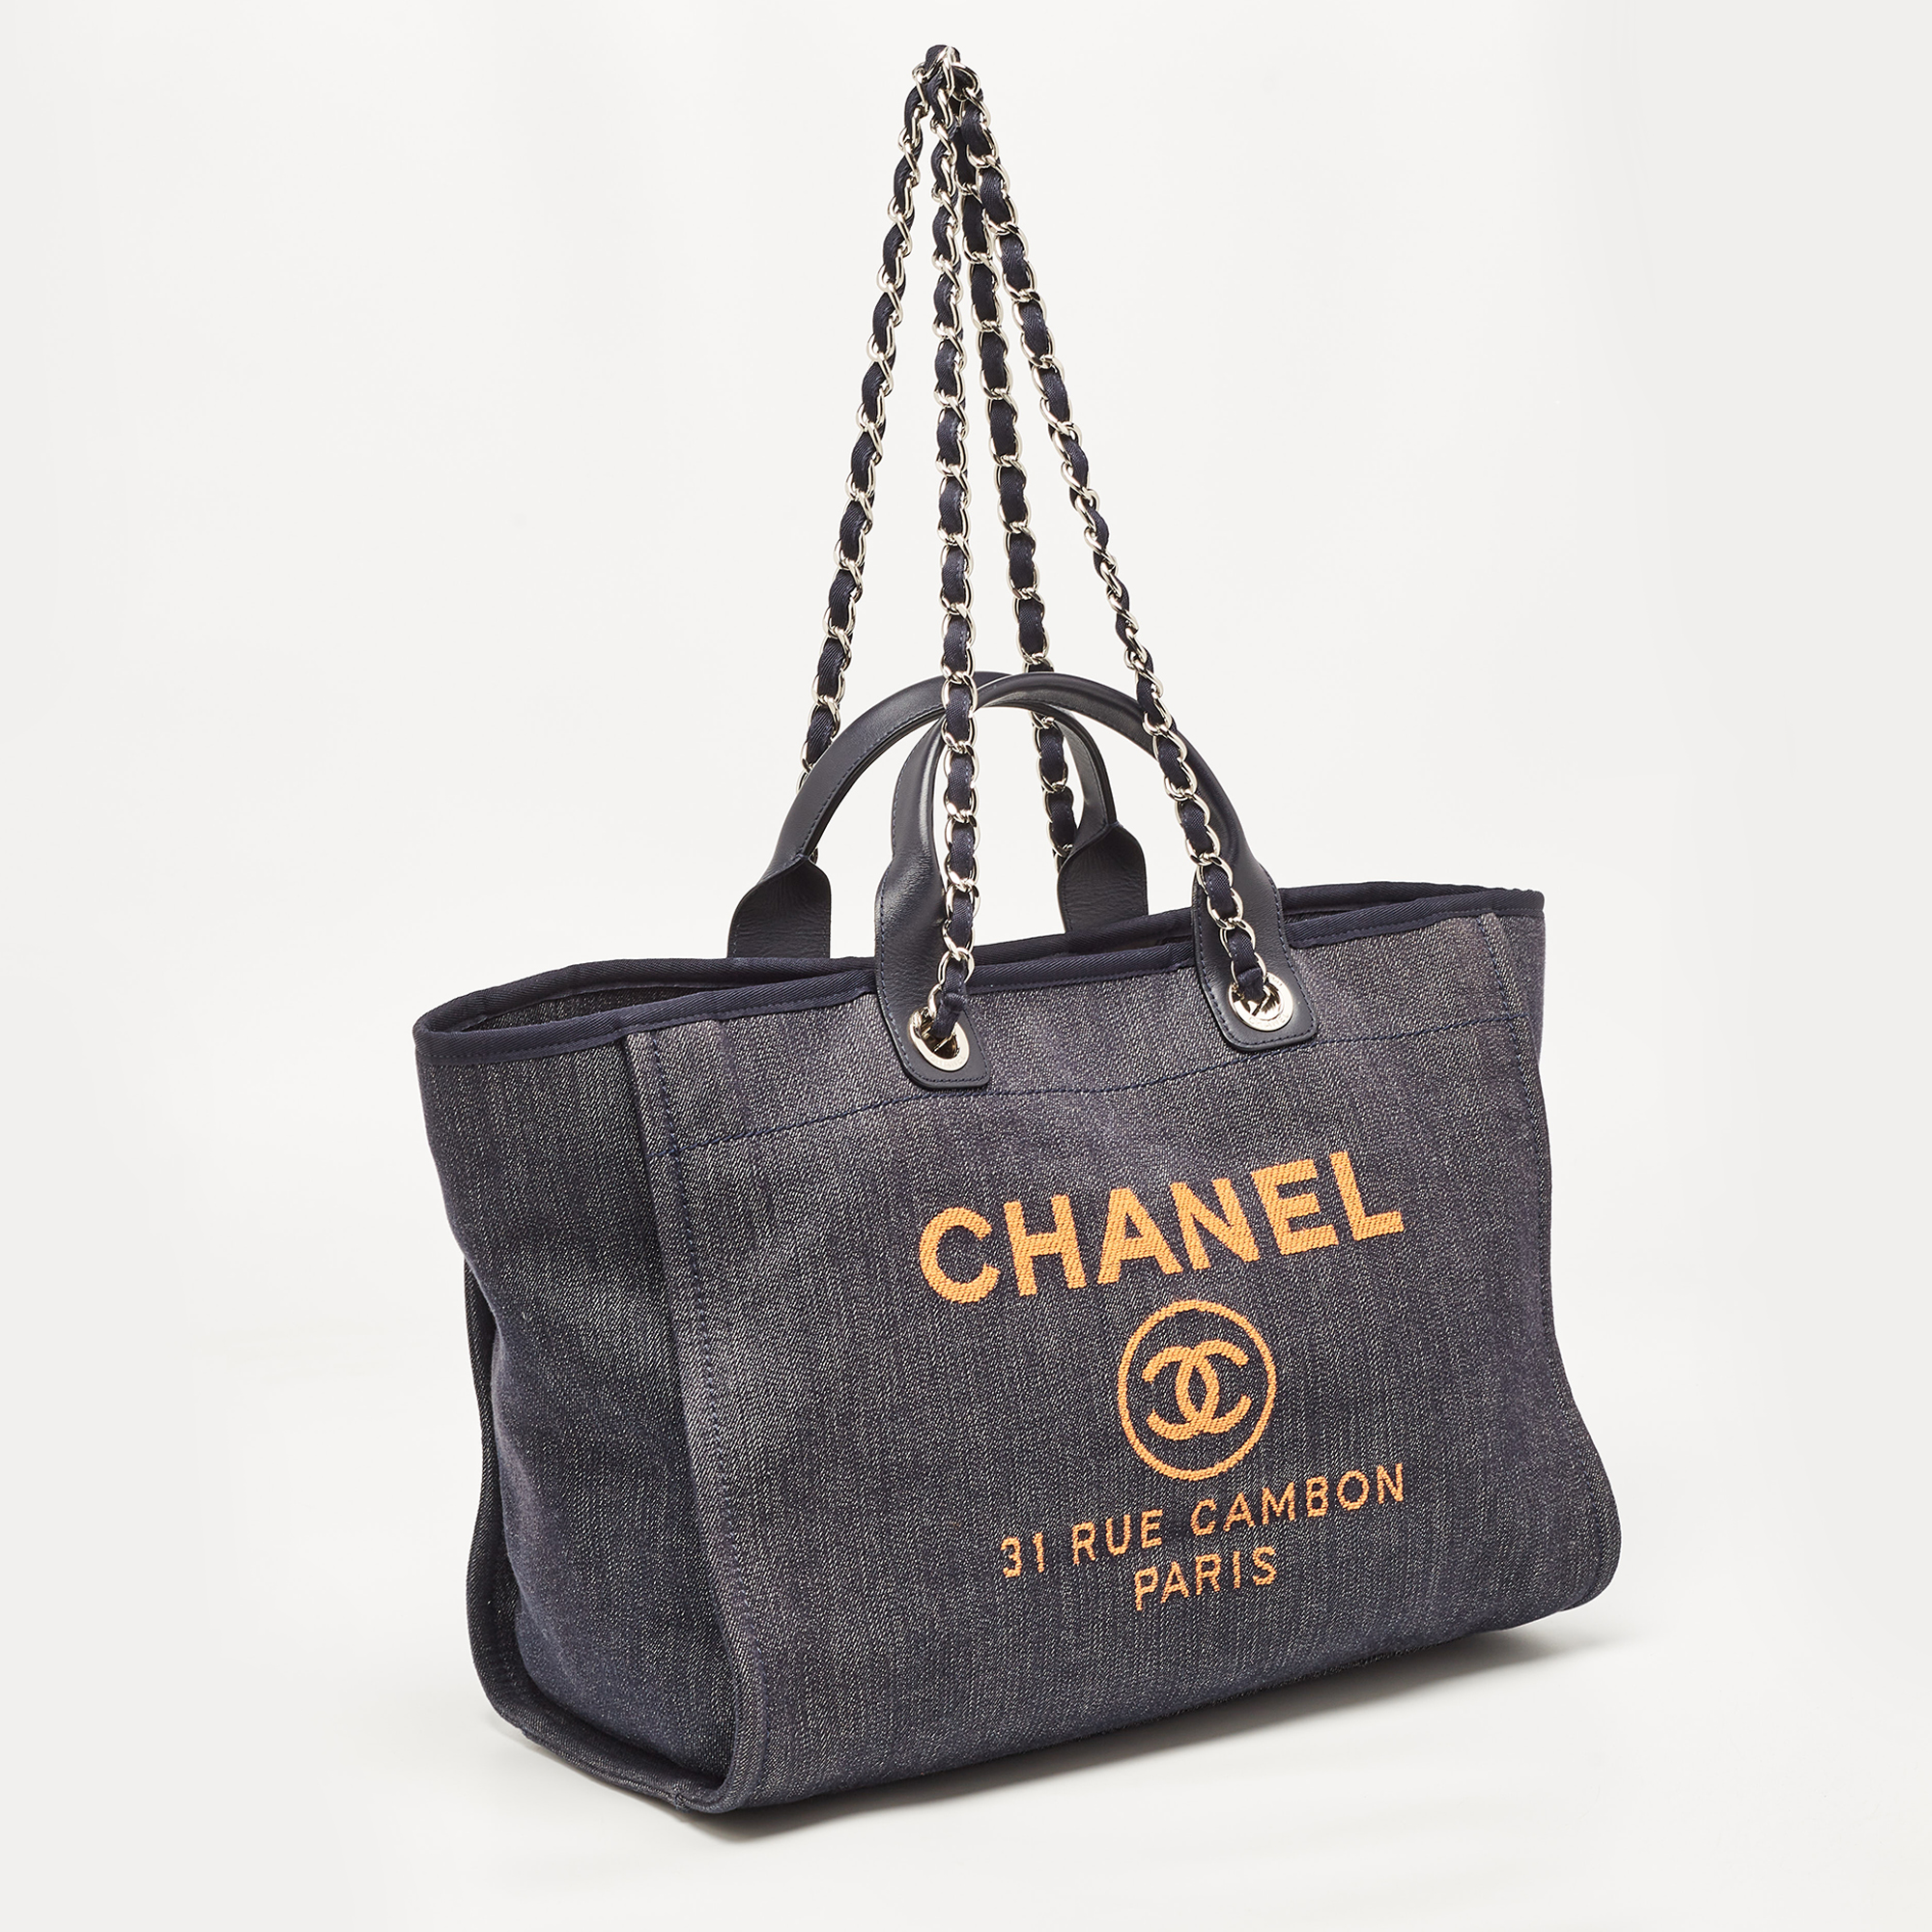 Chanel Blue Denim And Leather Medium Deauville Shopper Tote